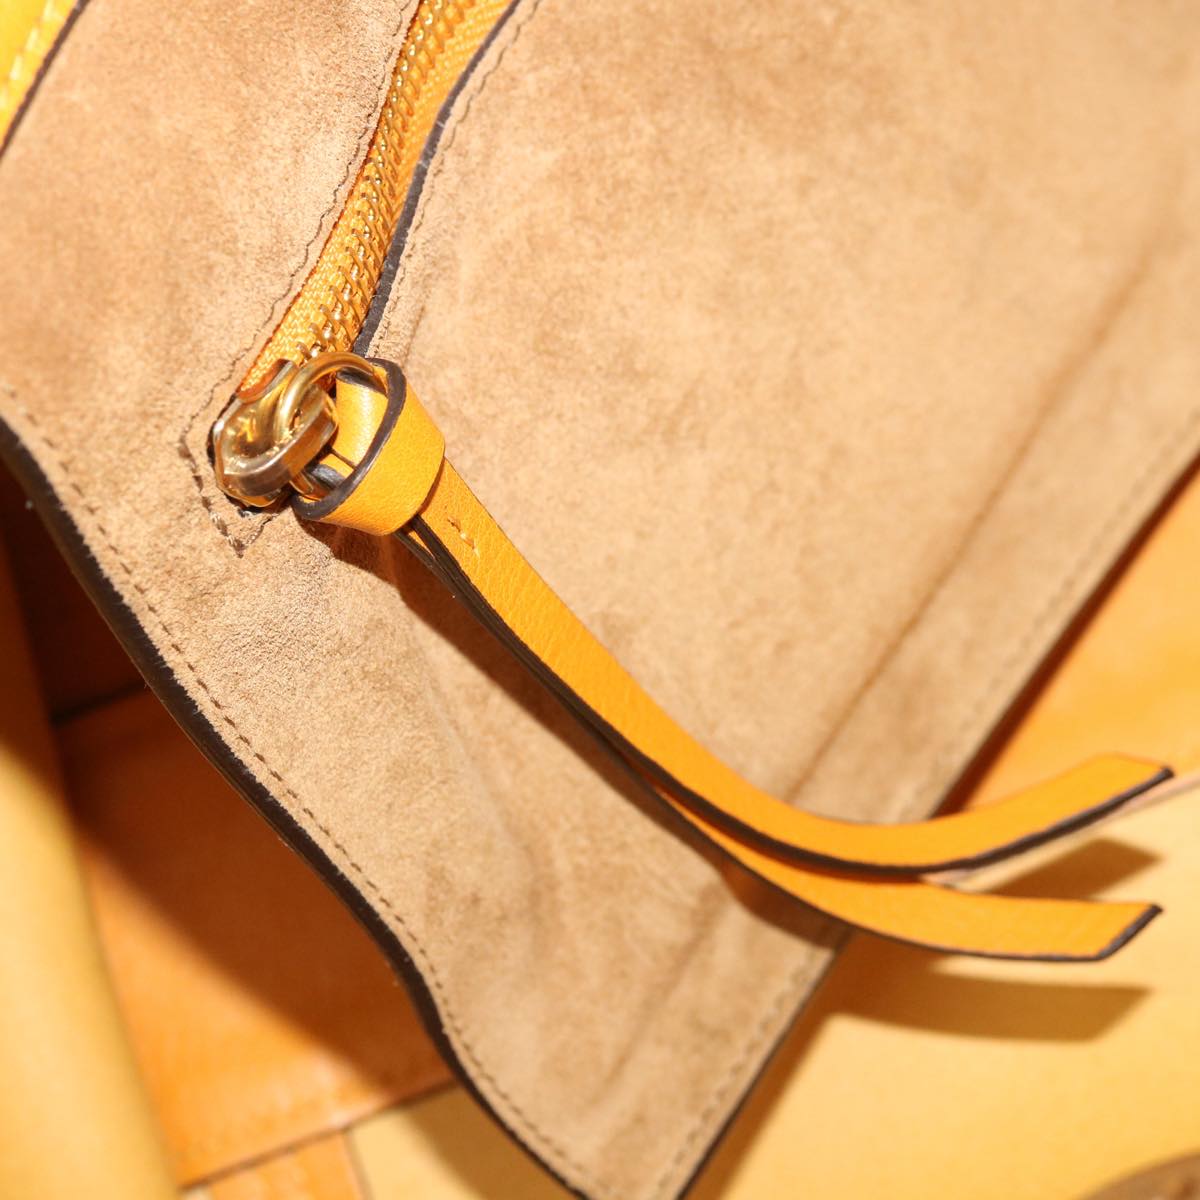 Chloe Tote Bag Leather Yellow Auth 65259